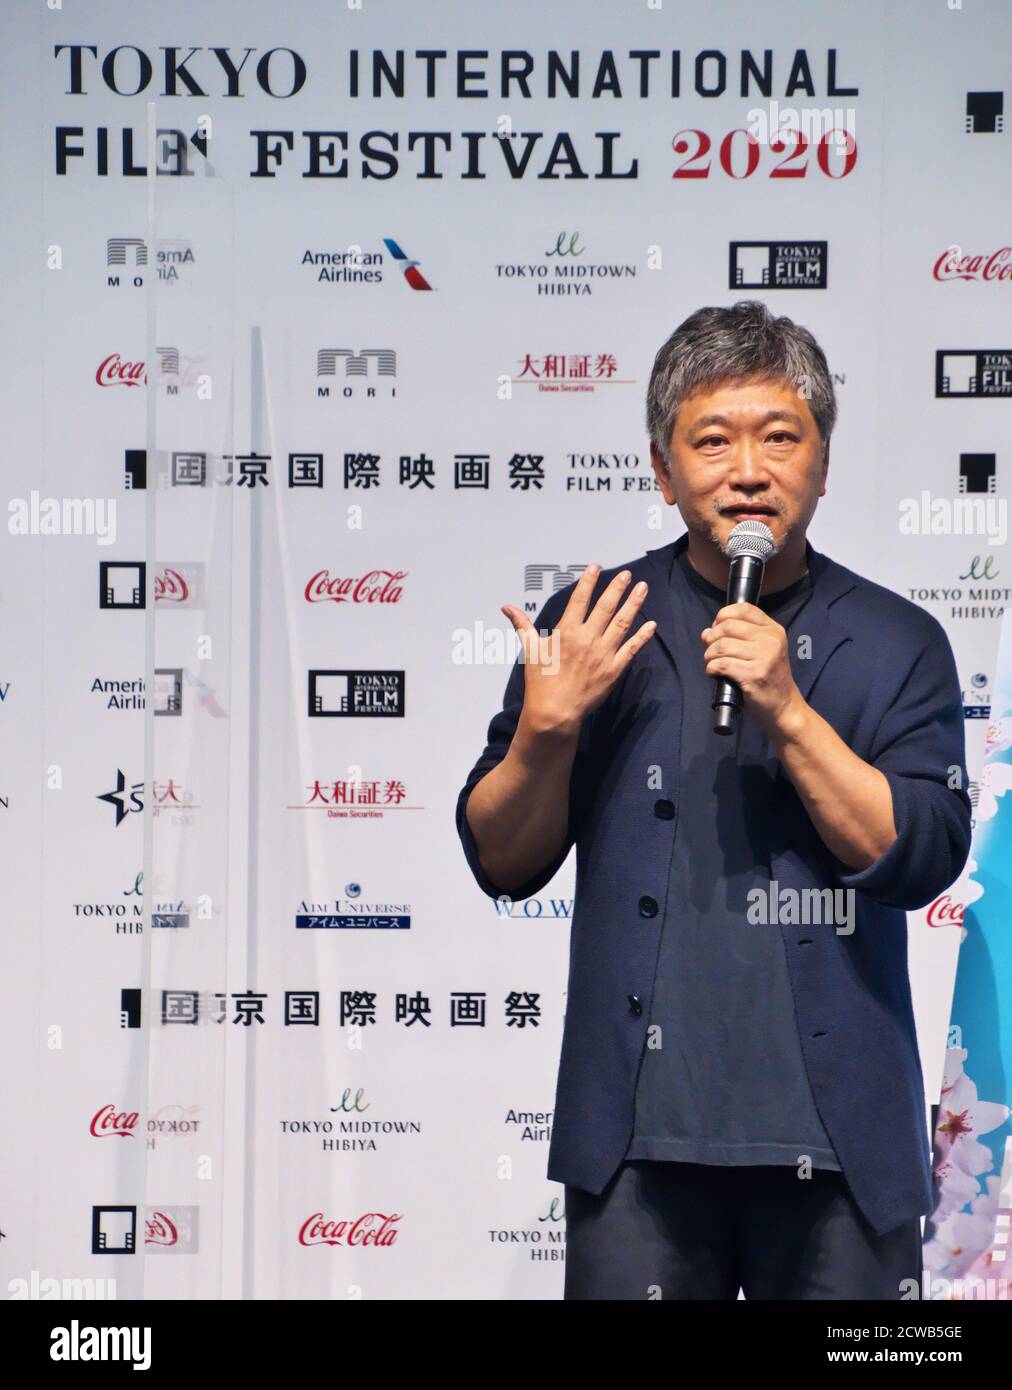 Director Hirokazu Kore-eda attends the press conference for the Tokyo International Film Festival 2020 in Tokyo, Japan on Tuesday, September 29, 2020. This year's Tokyo festival is held on October 31st to November 9th collaborate with Tokyo Filmex. 25 films are world premieres, and the remaining seven films Asian premieres in this event.     Photo by Keizo Mori/UPI Stock Photo